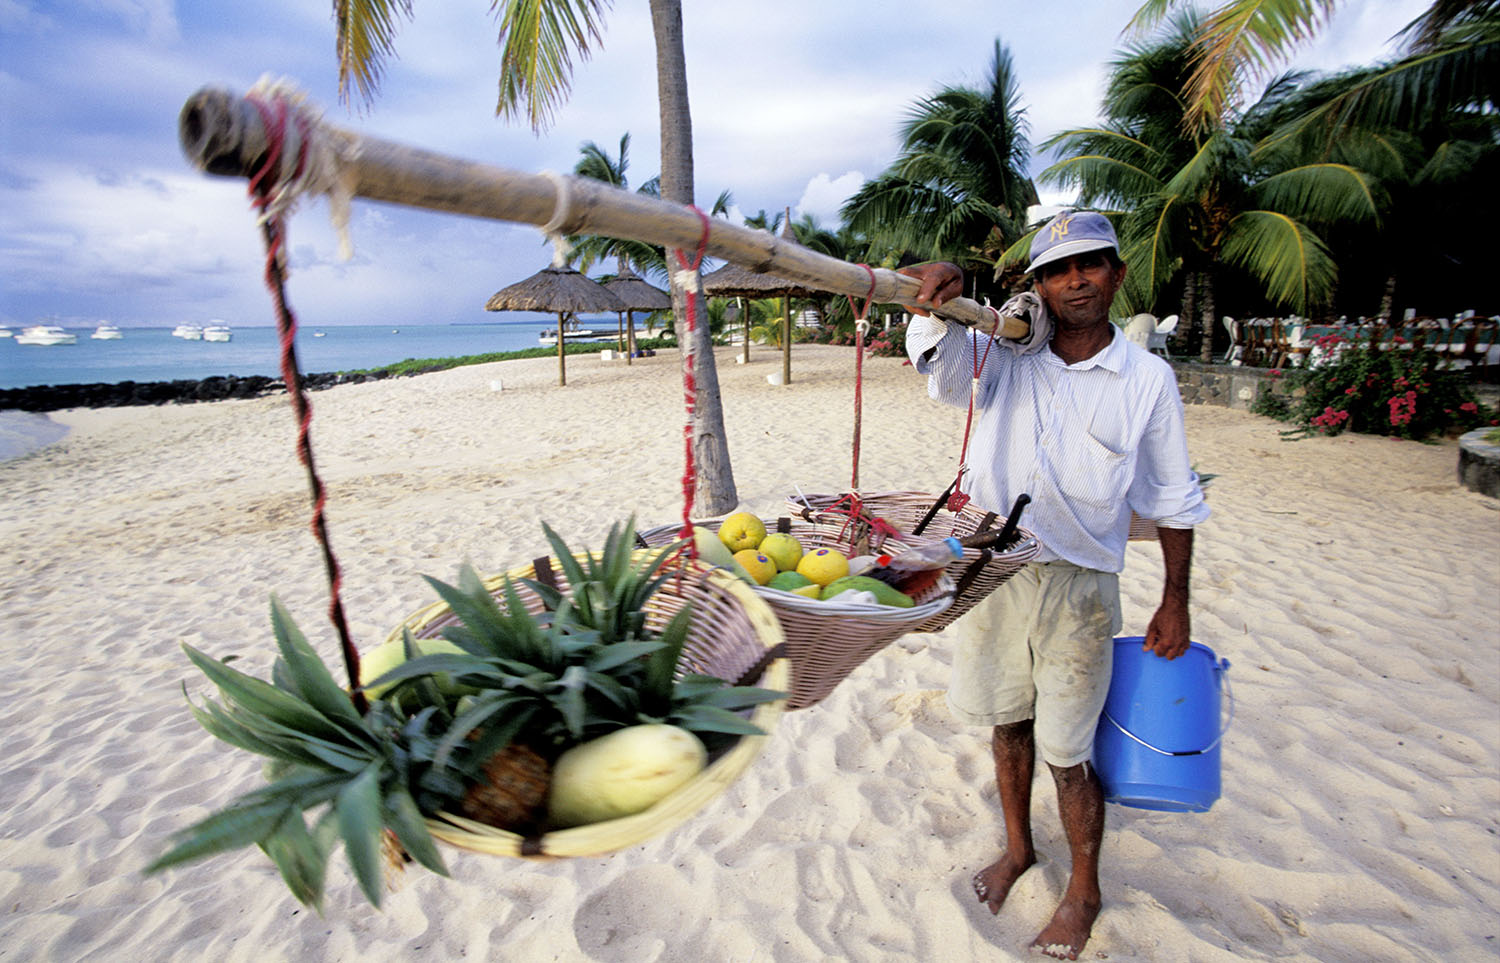 A fruit seller on Paradise Beach in Mauritius.